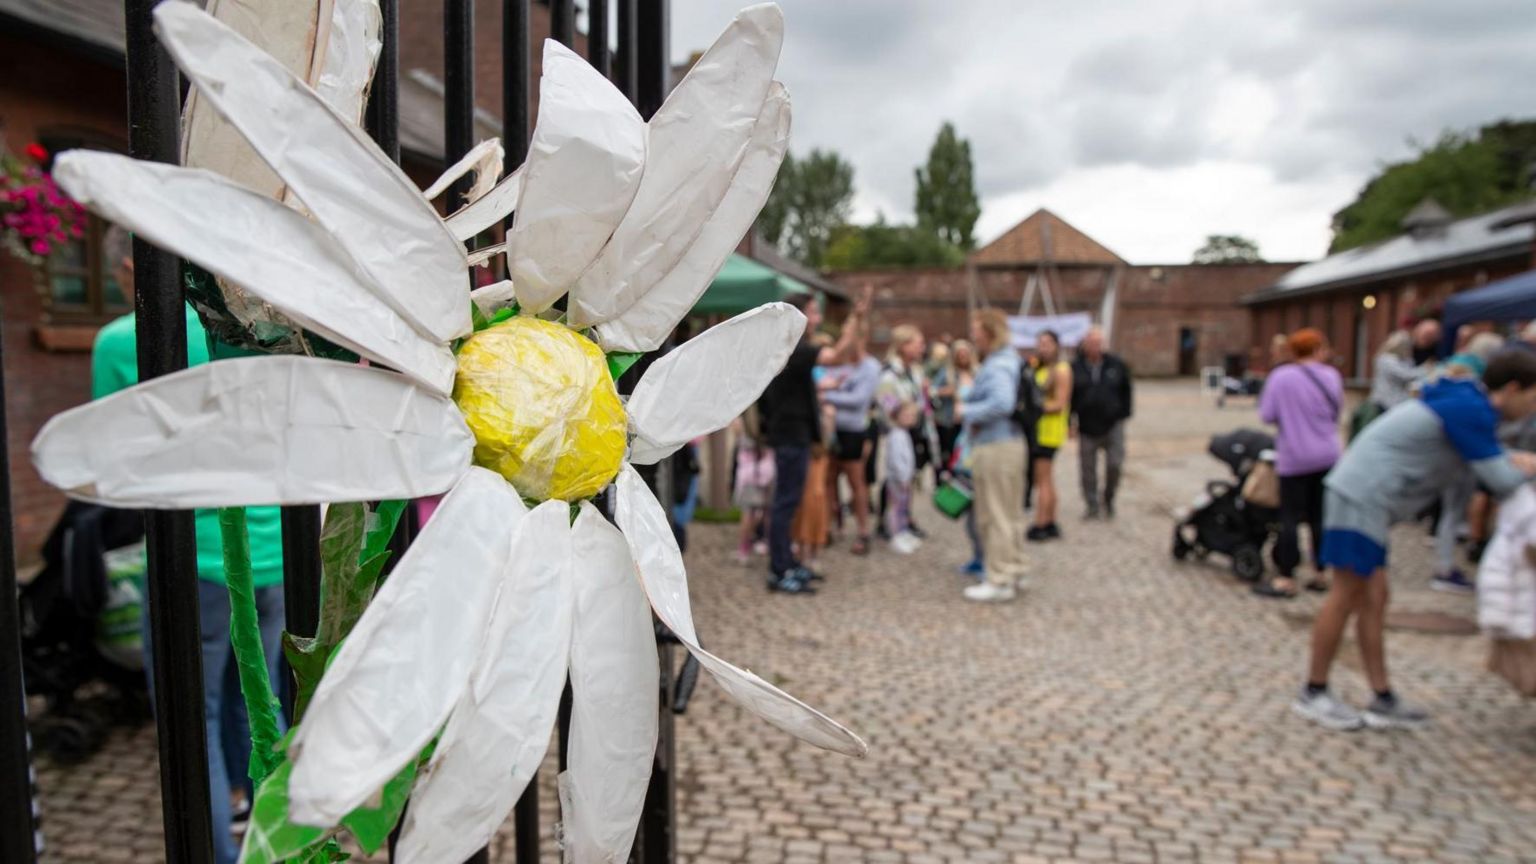 Flower art attached to gate of court yard with people at stalls